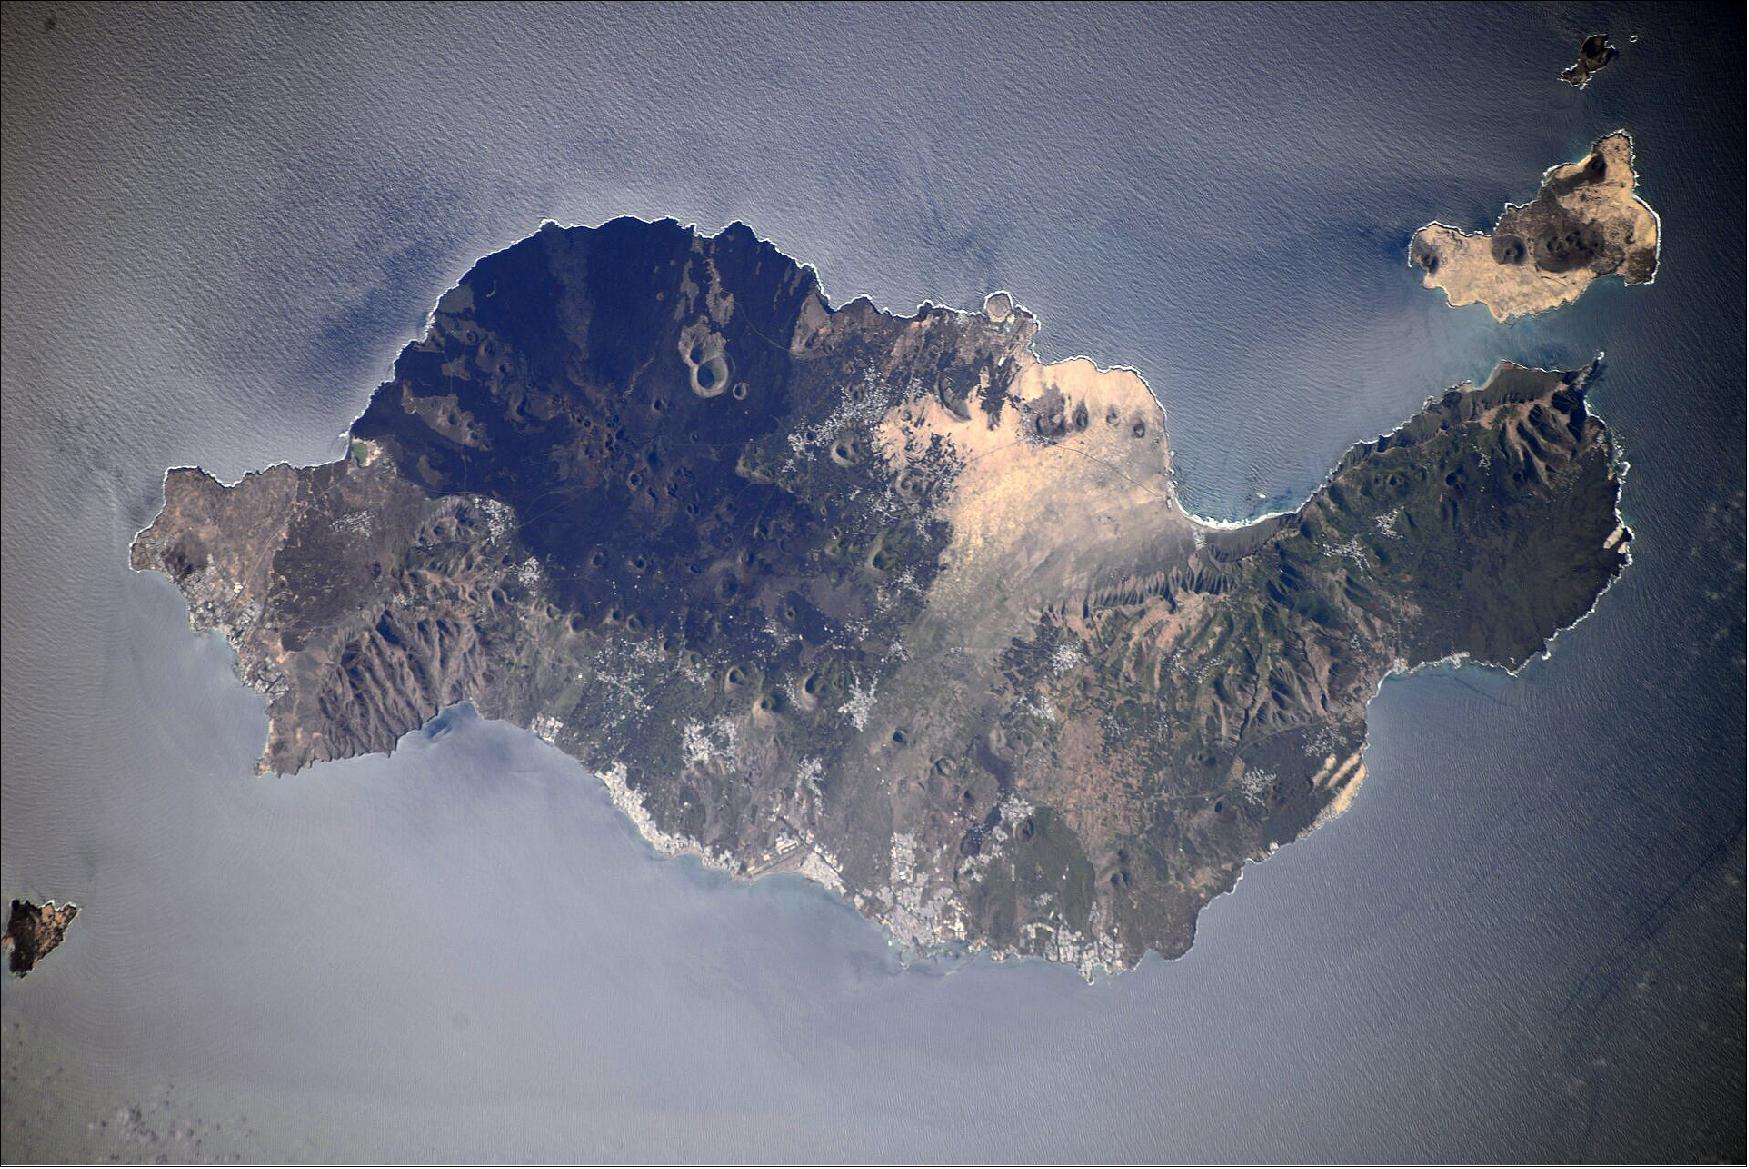 Figure 7: Roscosmos astronaut and former Pangaea trainee Sergei Kud-Sverchkov took this picture of the island of Lanzarote, Spain, from the International Space Station during his spaceflight mission in 2020 (image credit: ESA, A. Romeo)